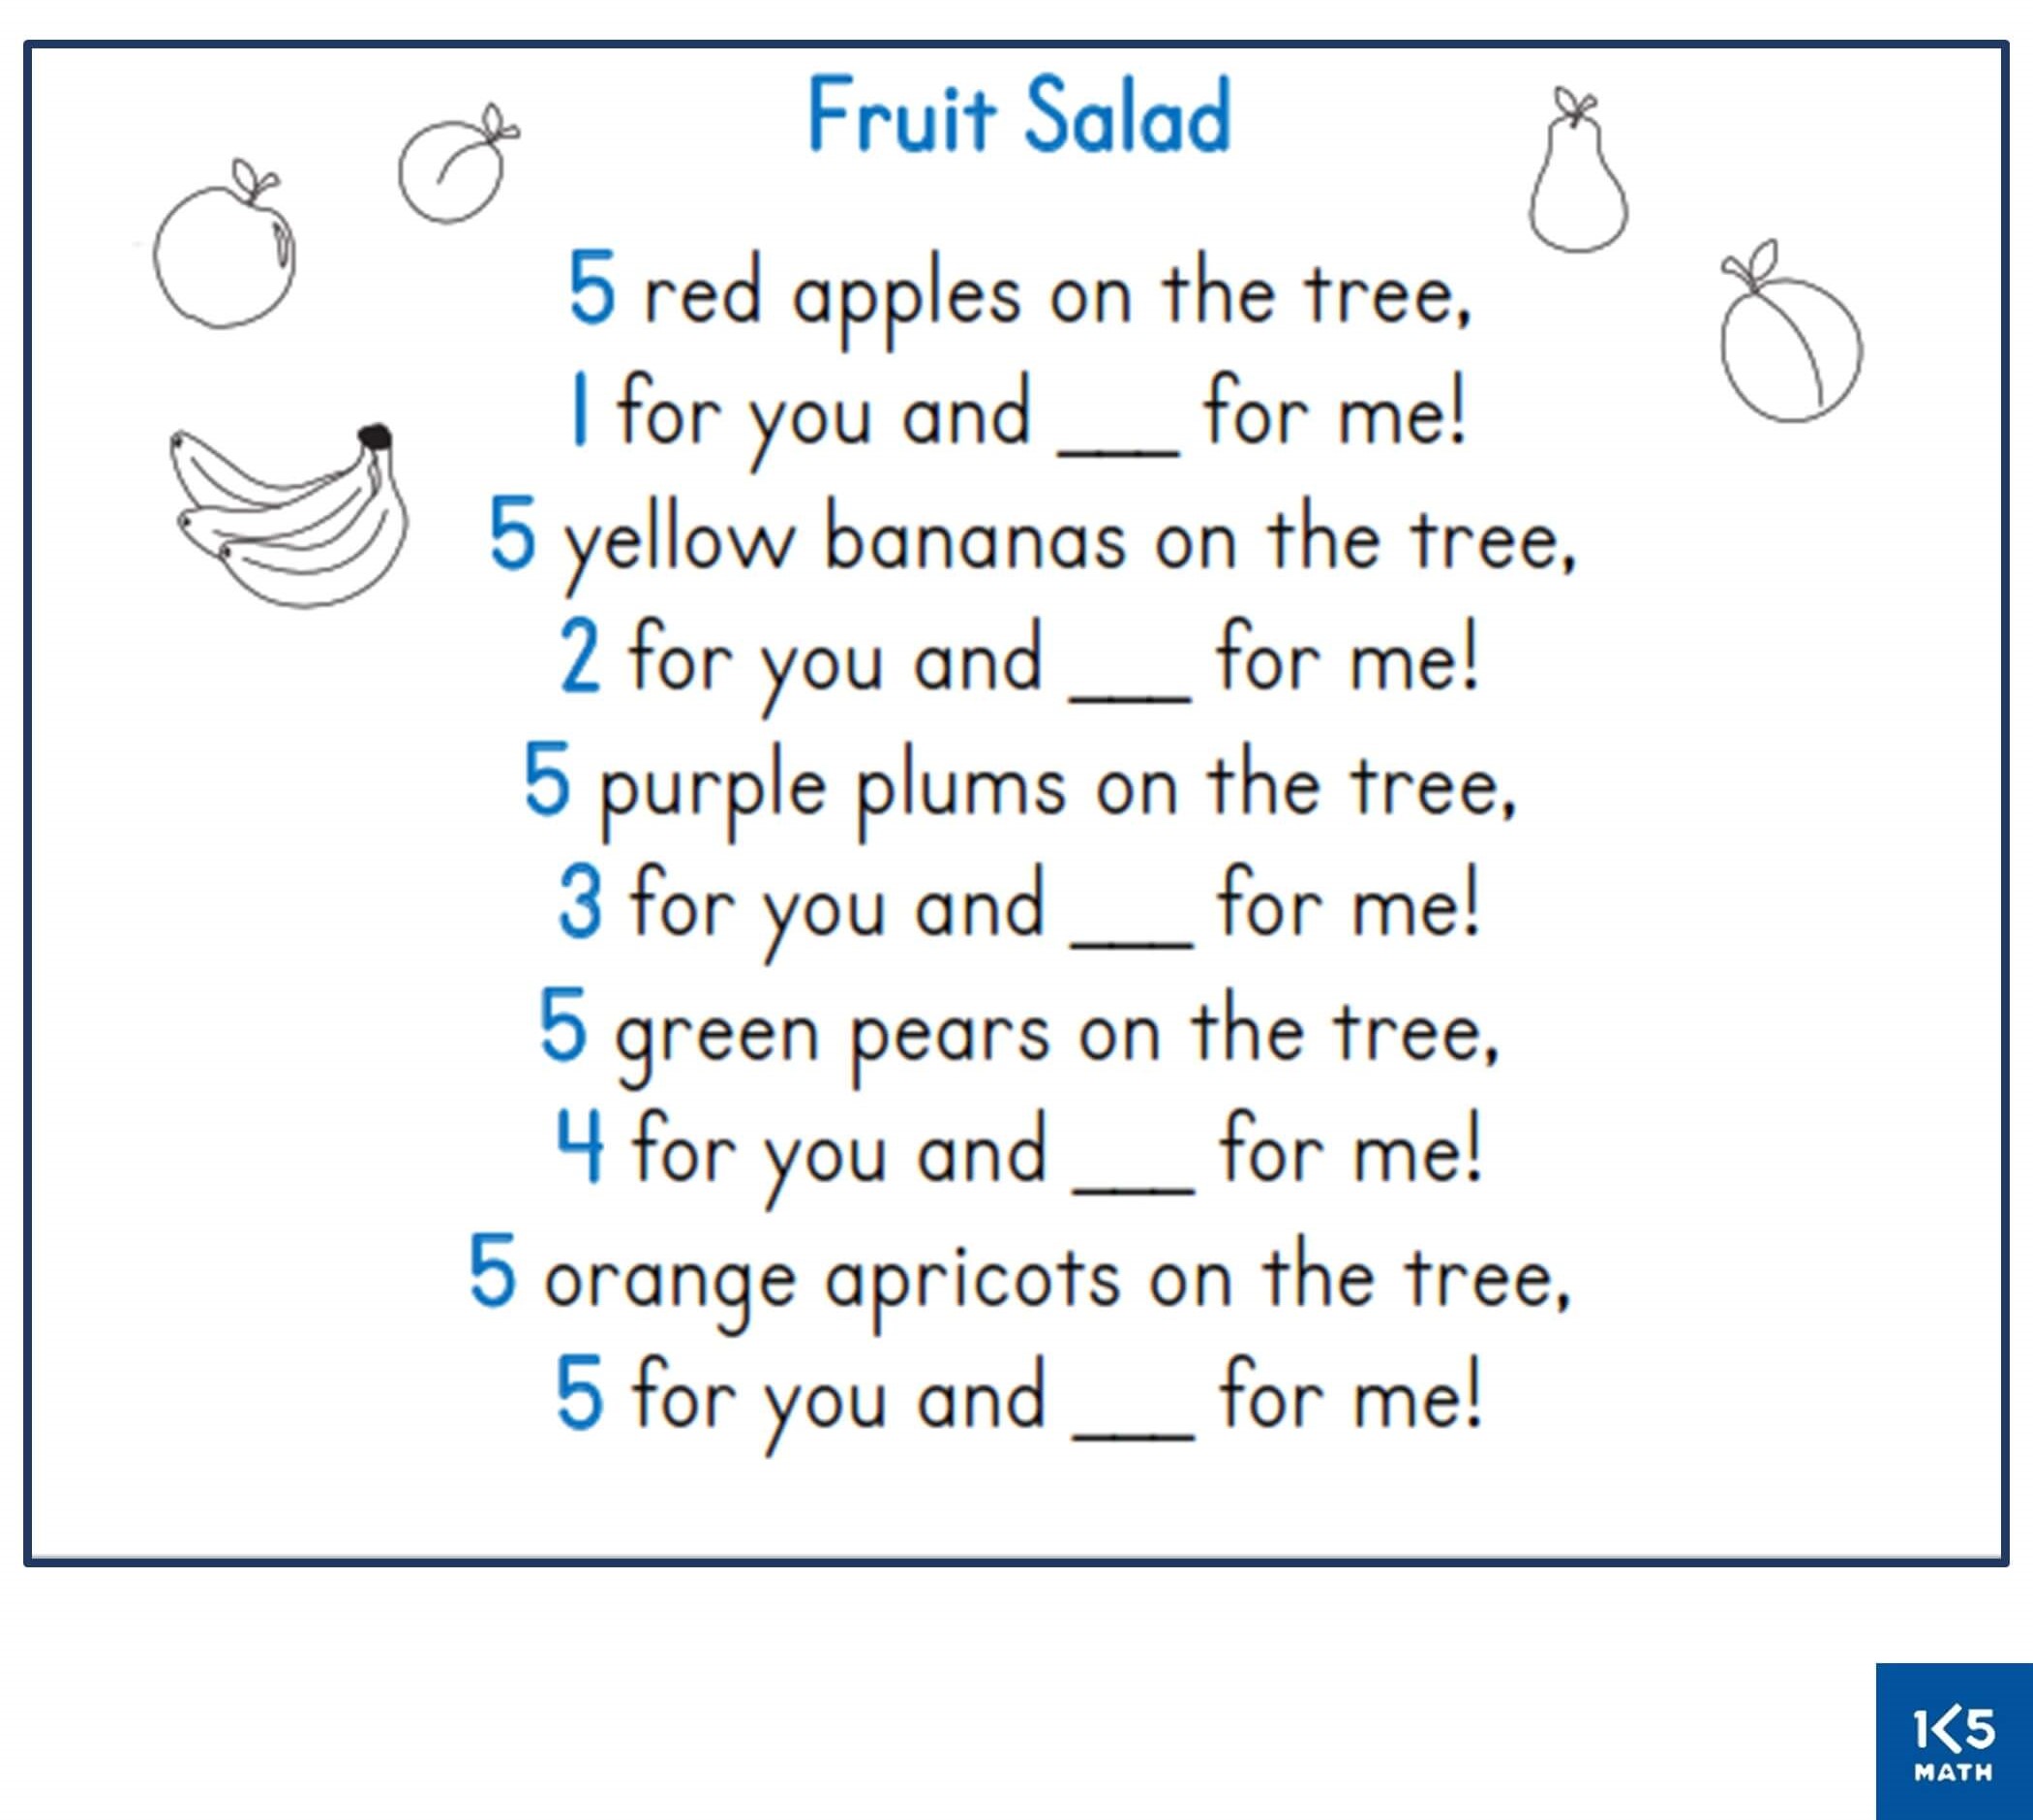 Facts of Five Rhyme: Fruit Salad